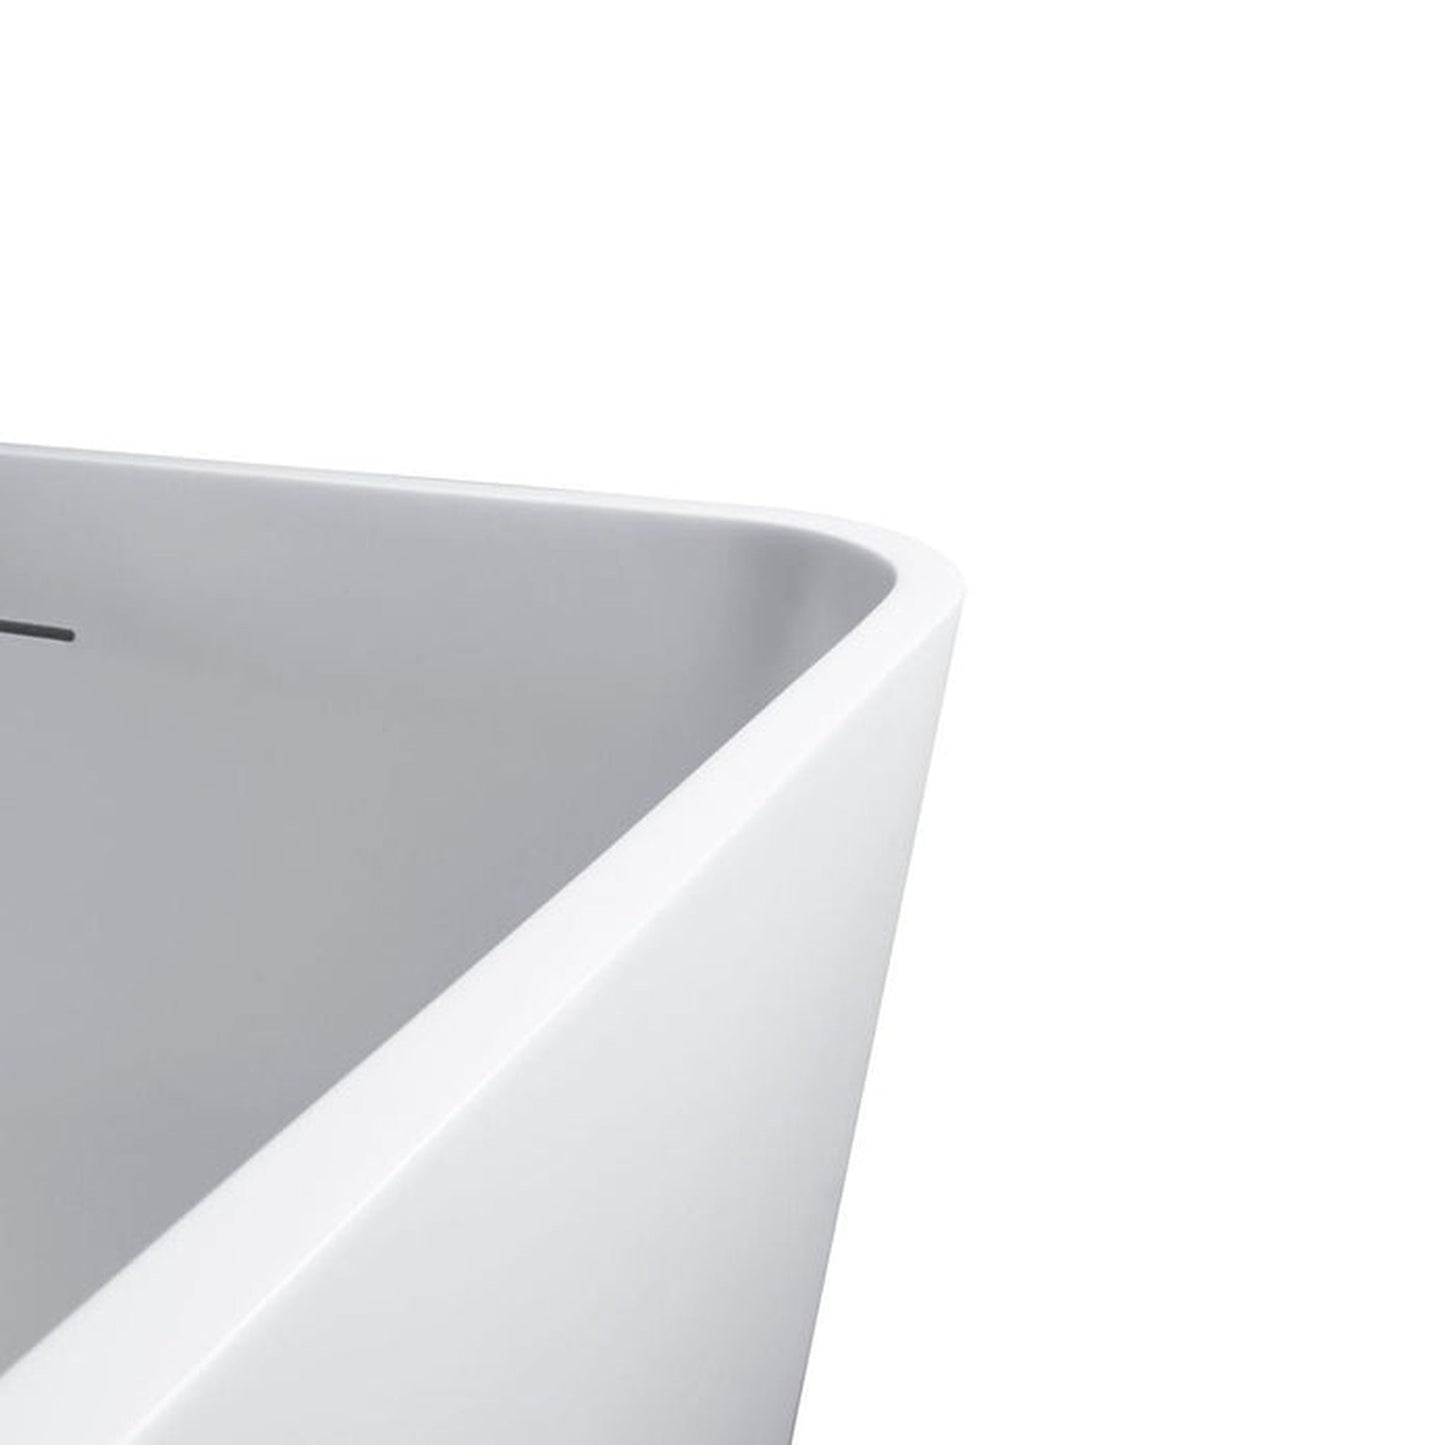 Vanity Art 67" Glossy White Solid Surface Resin Stone Freestanding Soaking Tub With Slotted Overflow and Pop-up Drain